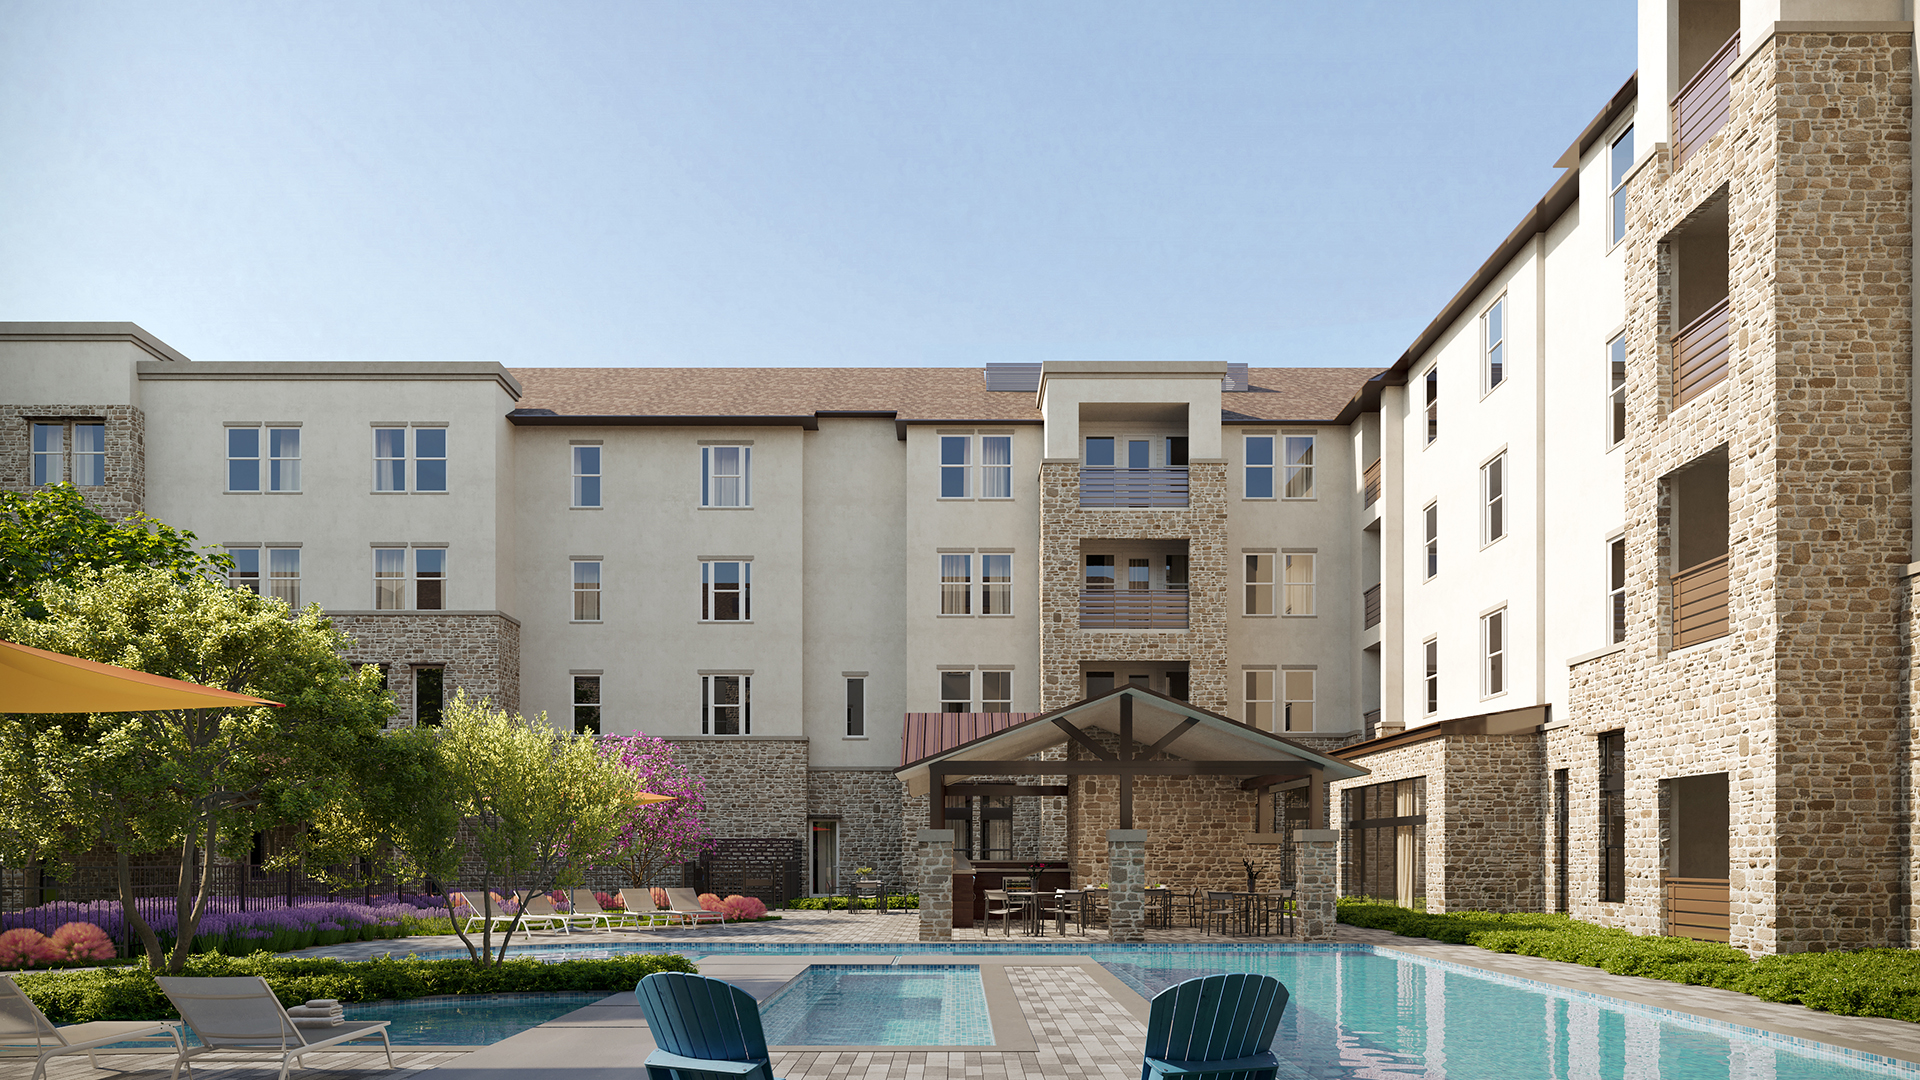 Resort-Style Amenities at RiverWalk Flats That Will Make Your Life More Enjoyable